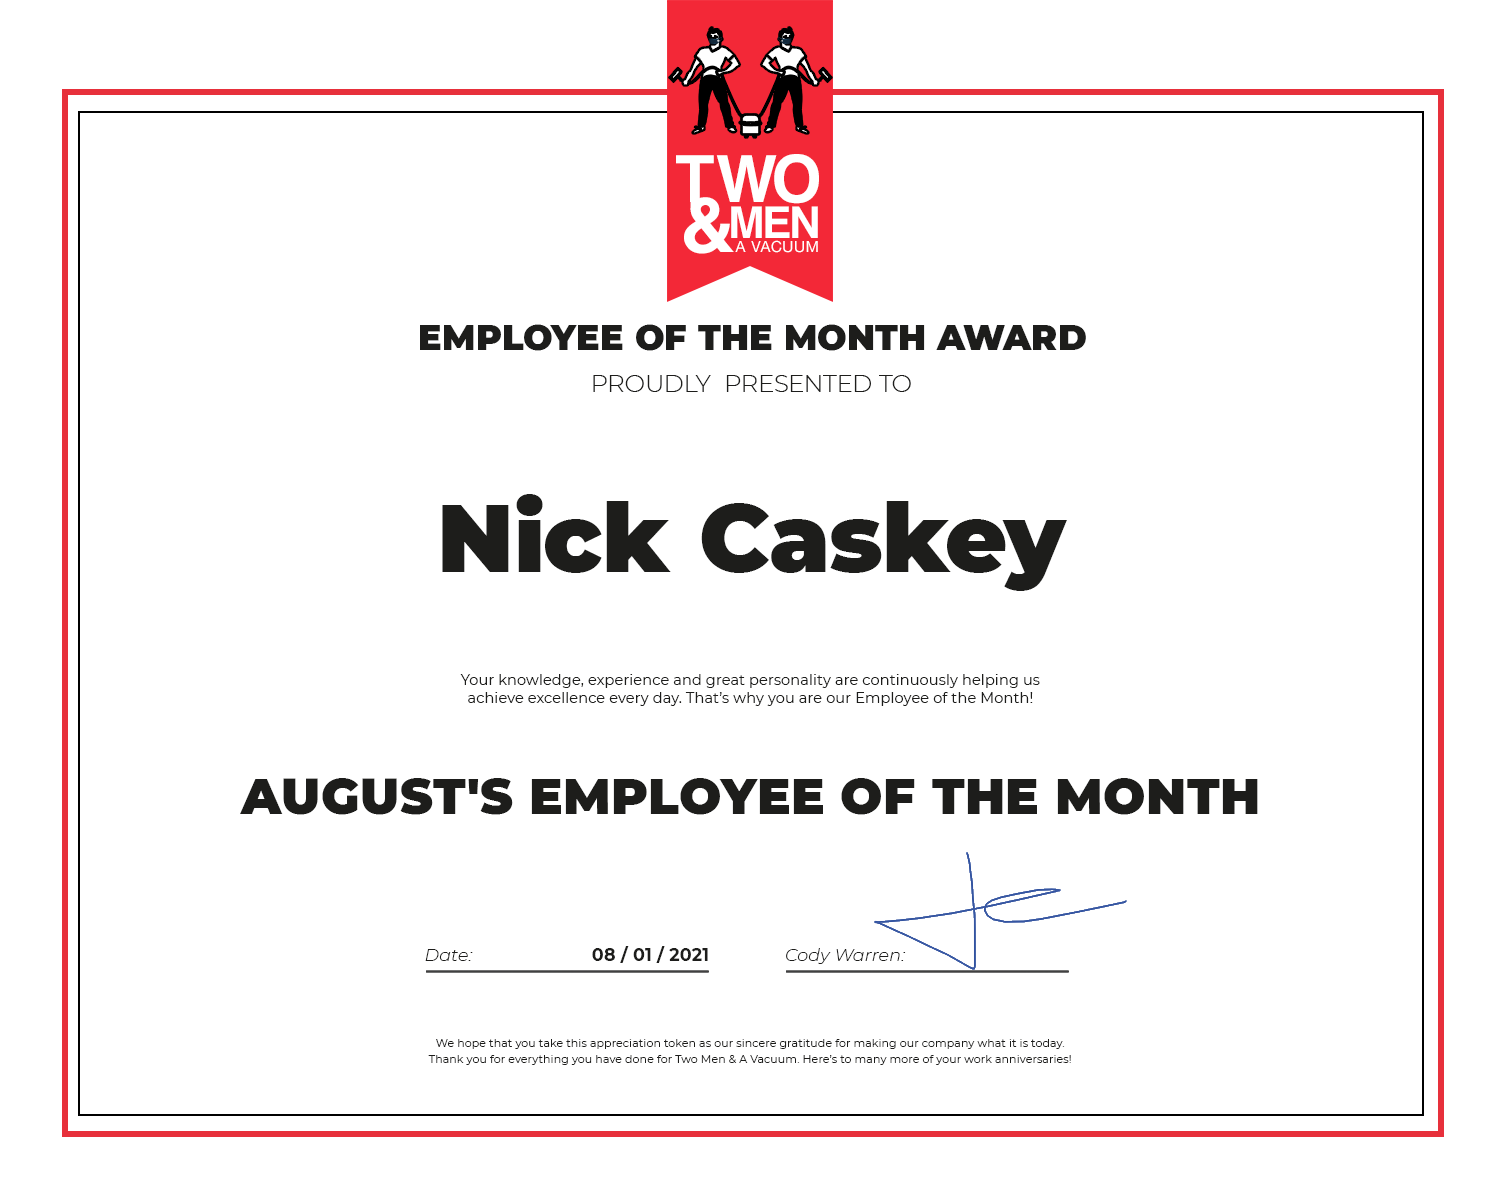 employee of the month award png